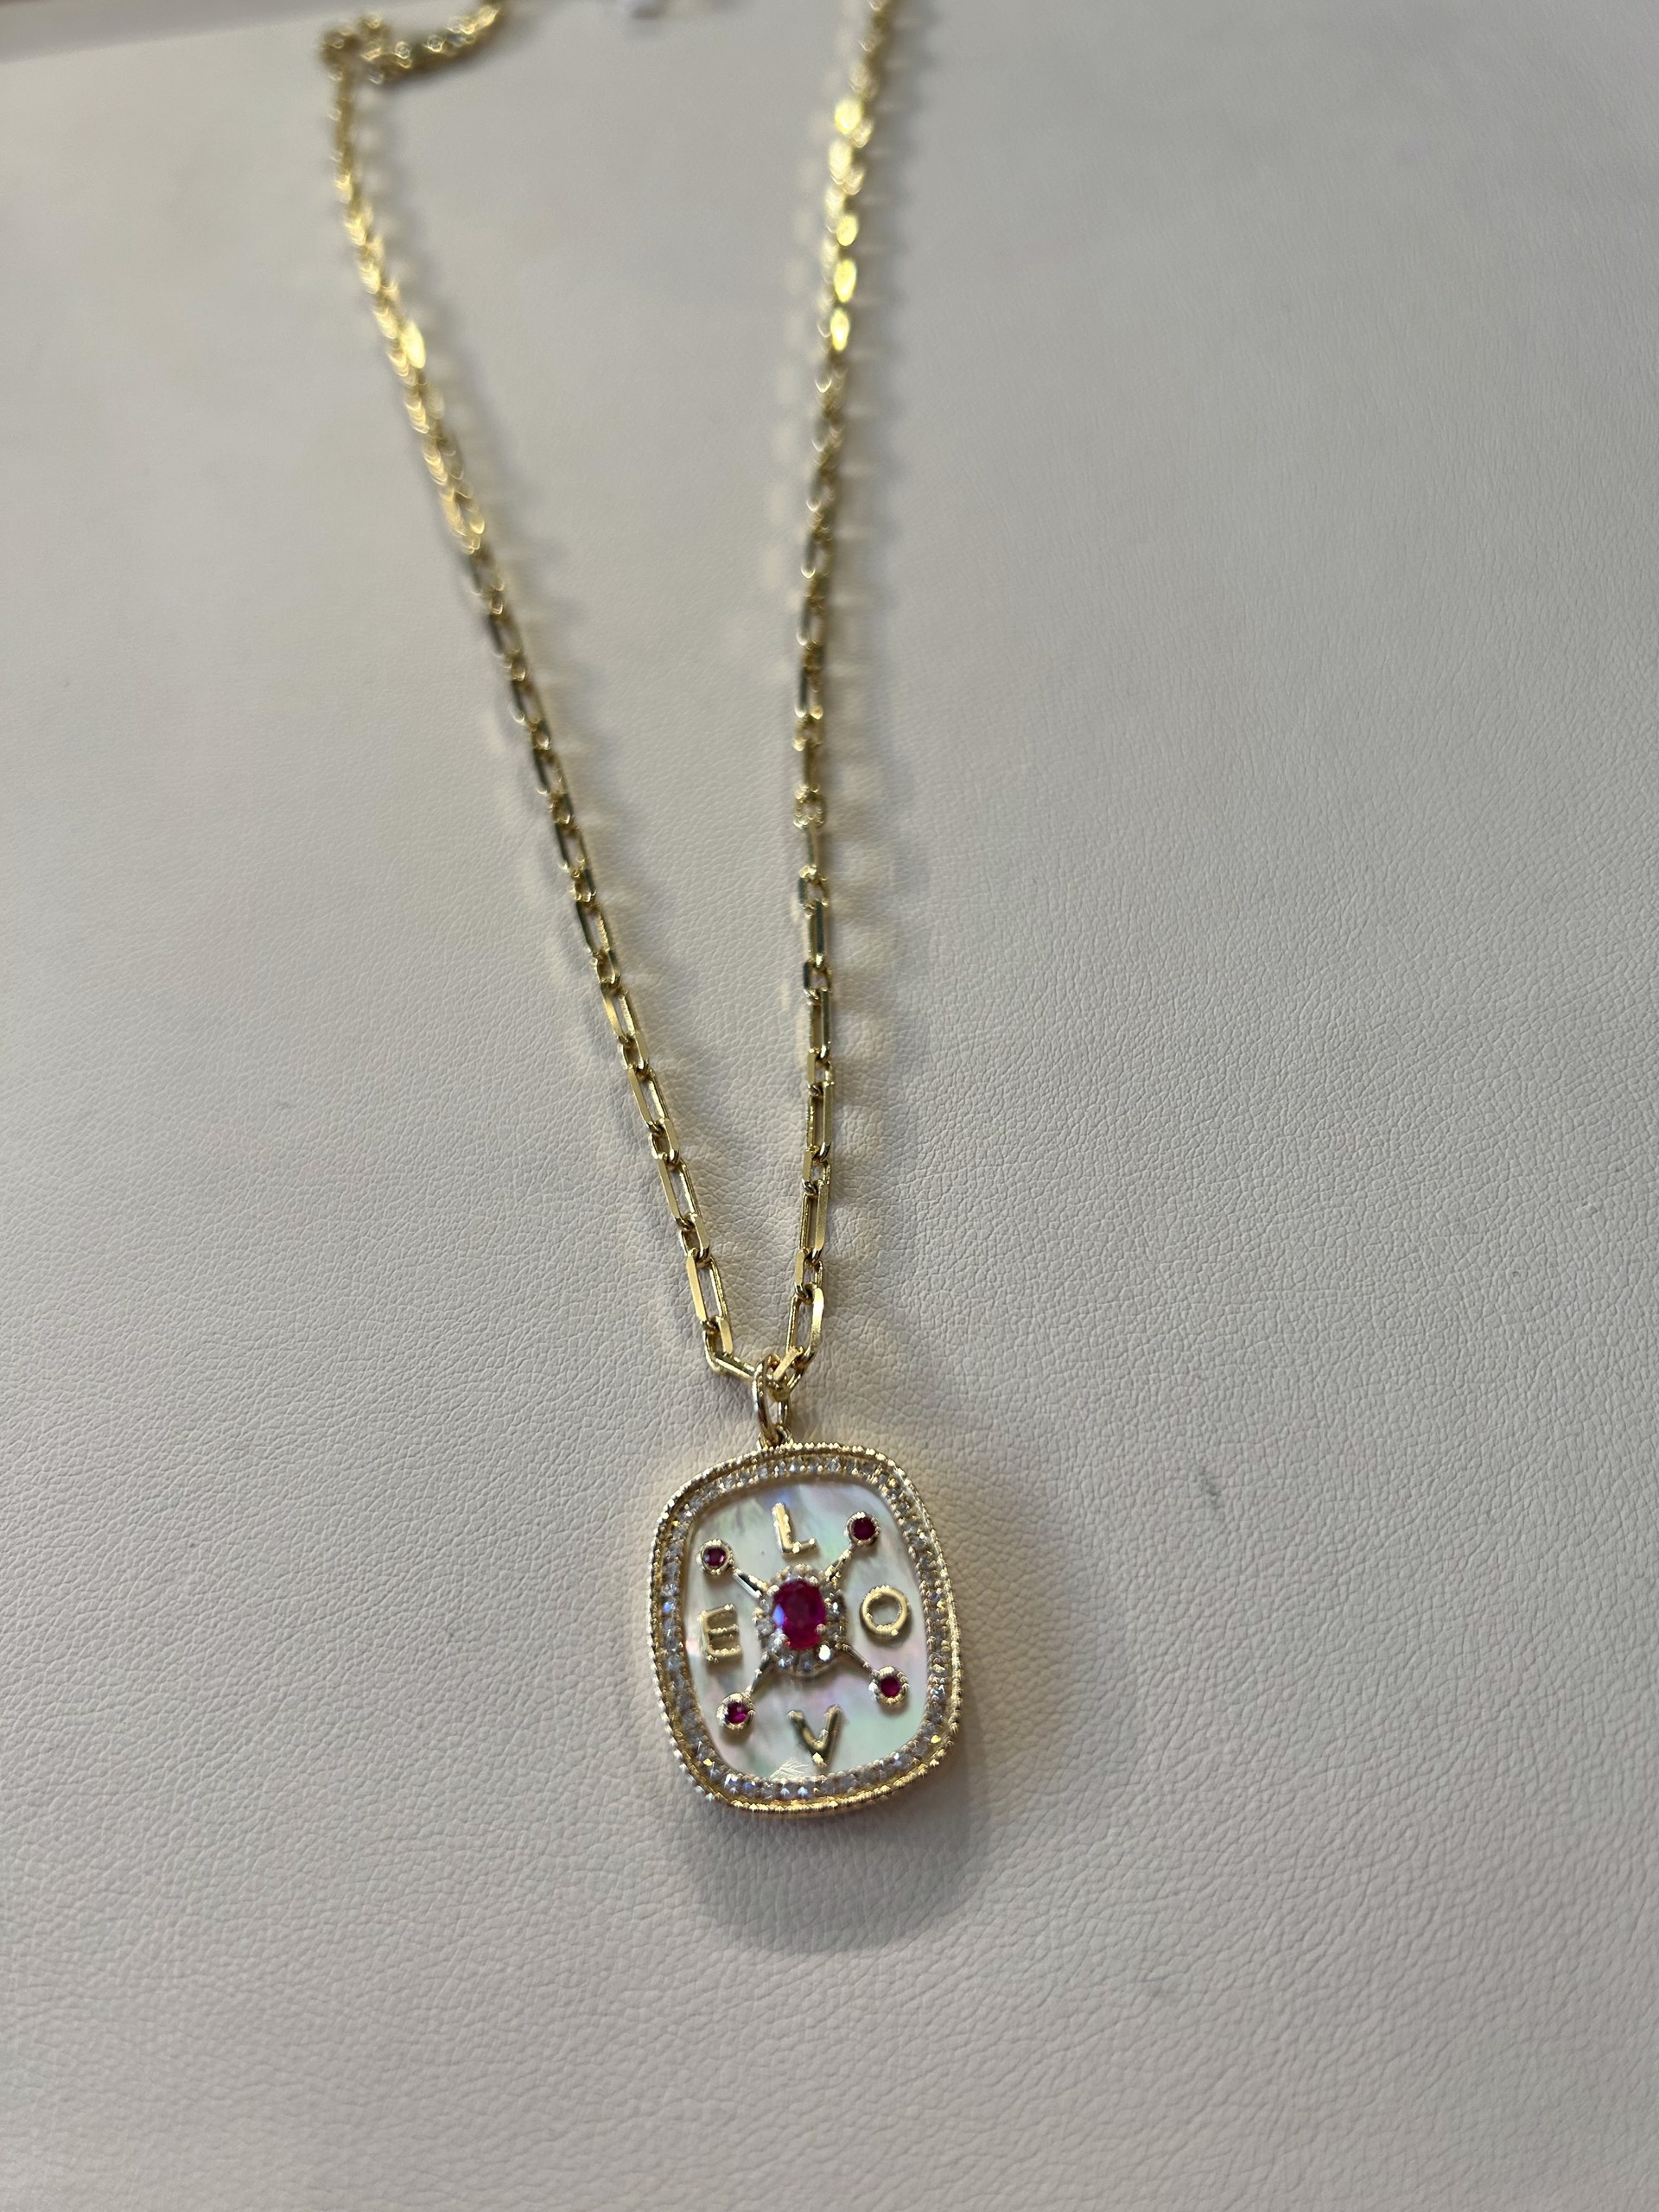 KB-N17 14k gold Necklace with gold diamond and ruby LOVE Pendant by Karen Birchmier